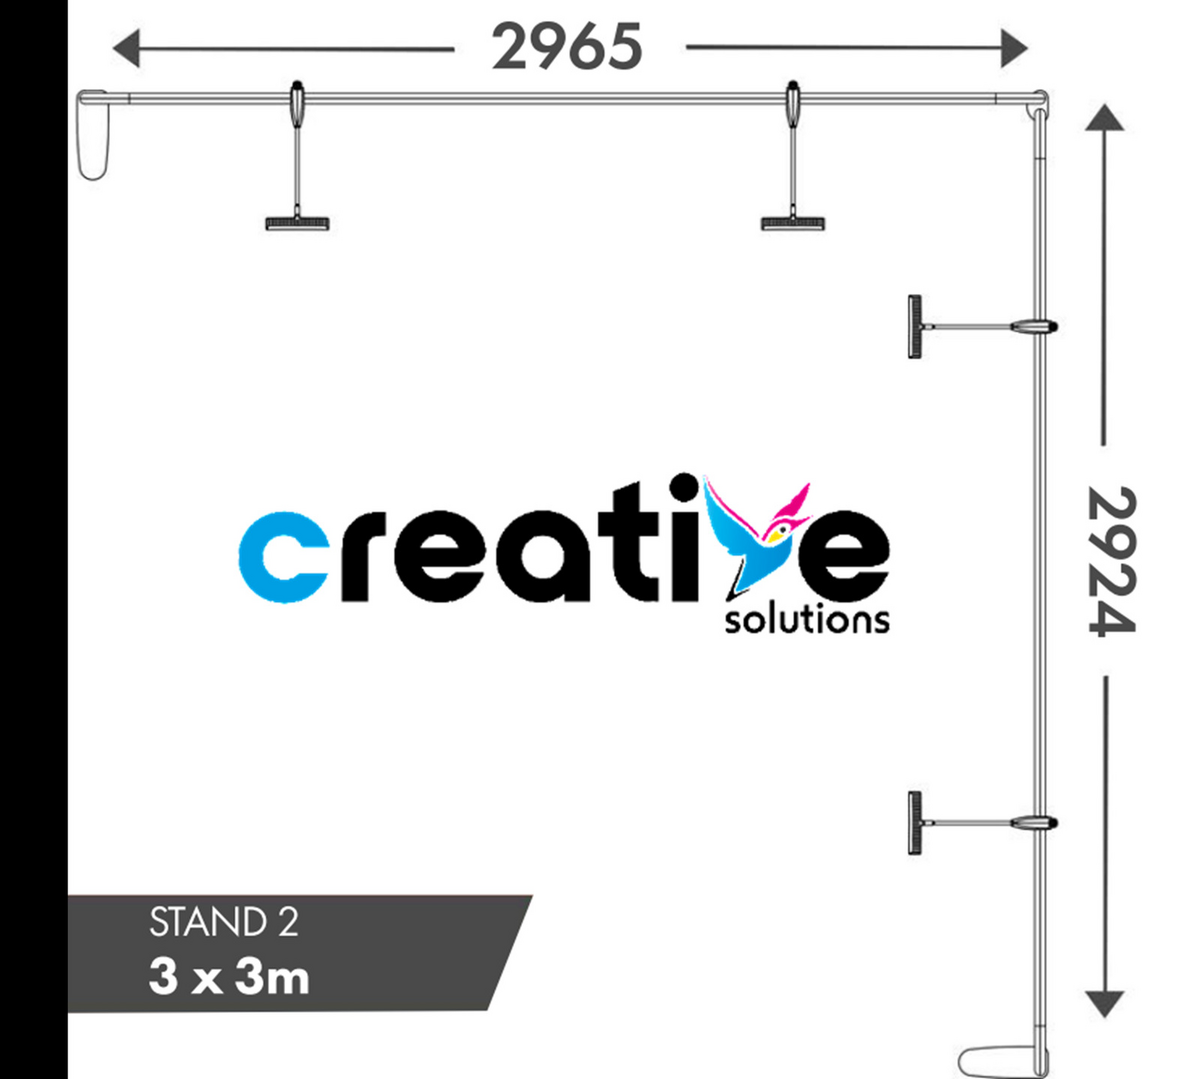 3x3 Shell Scheme Fabric Exhibition Stand Dimensions - Creative Solutions.png